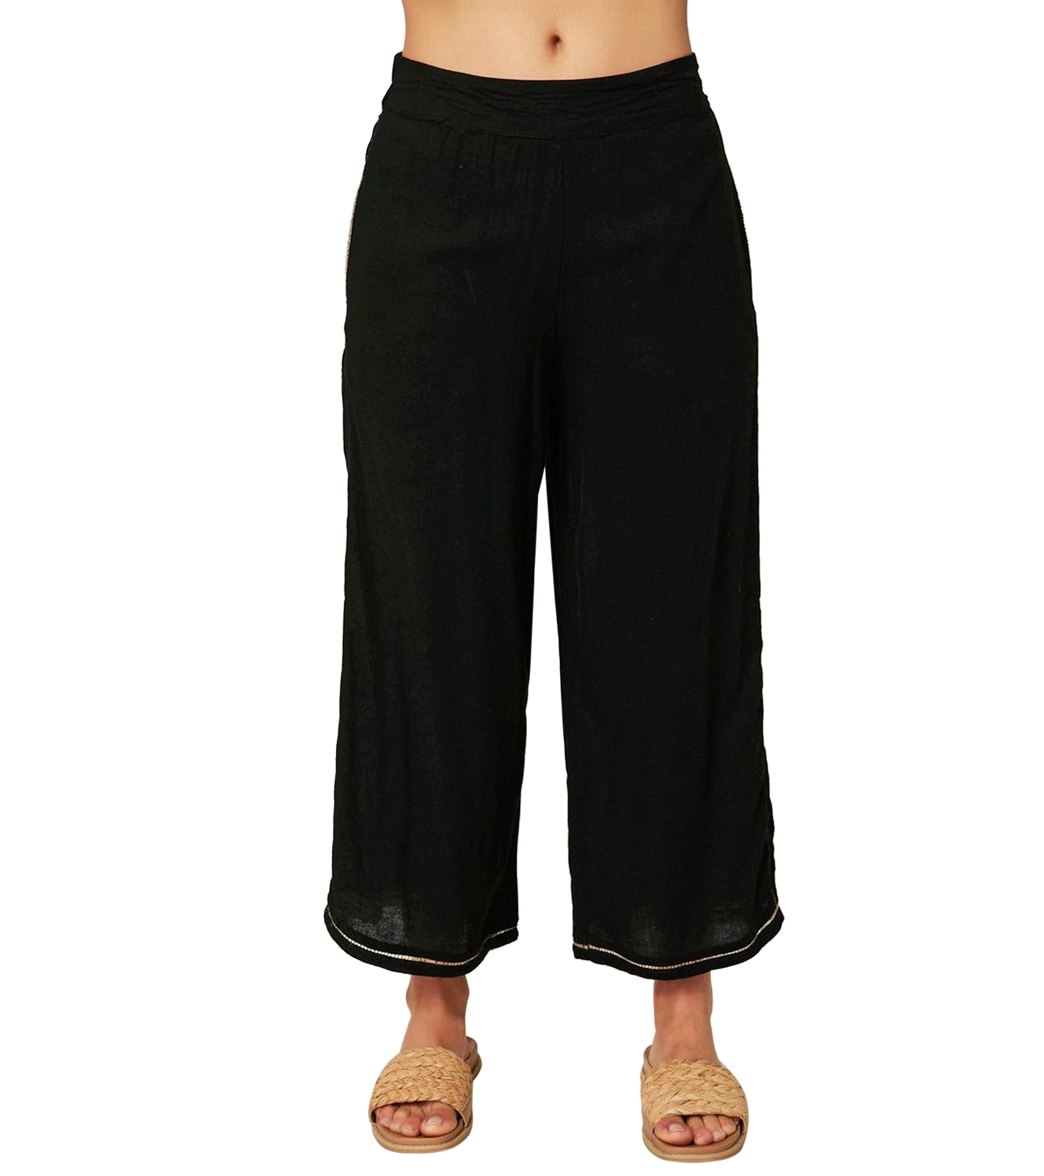 O'neill Women's Lido Solid Cropped Pants - Black Large - Swimoutlet.com